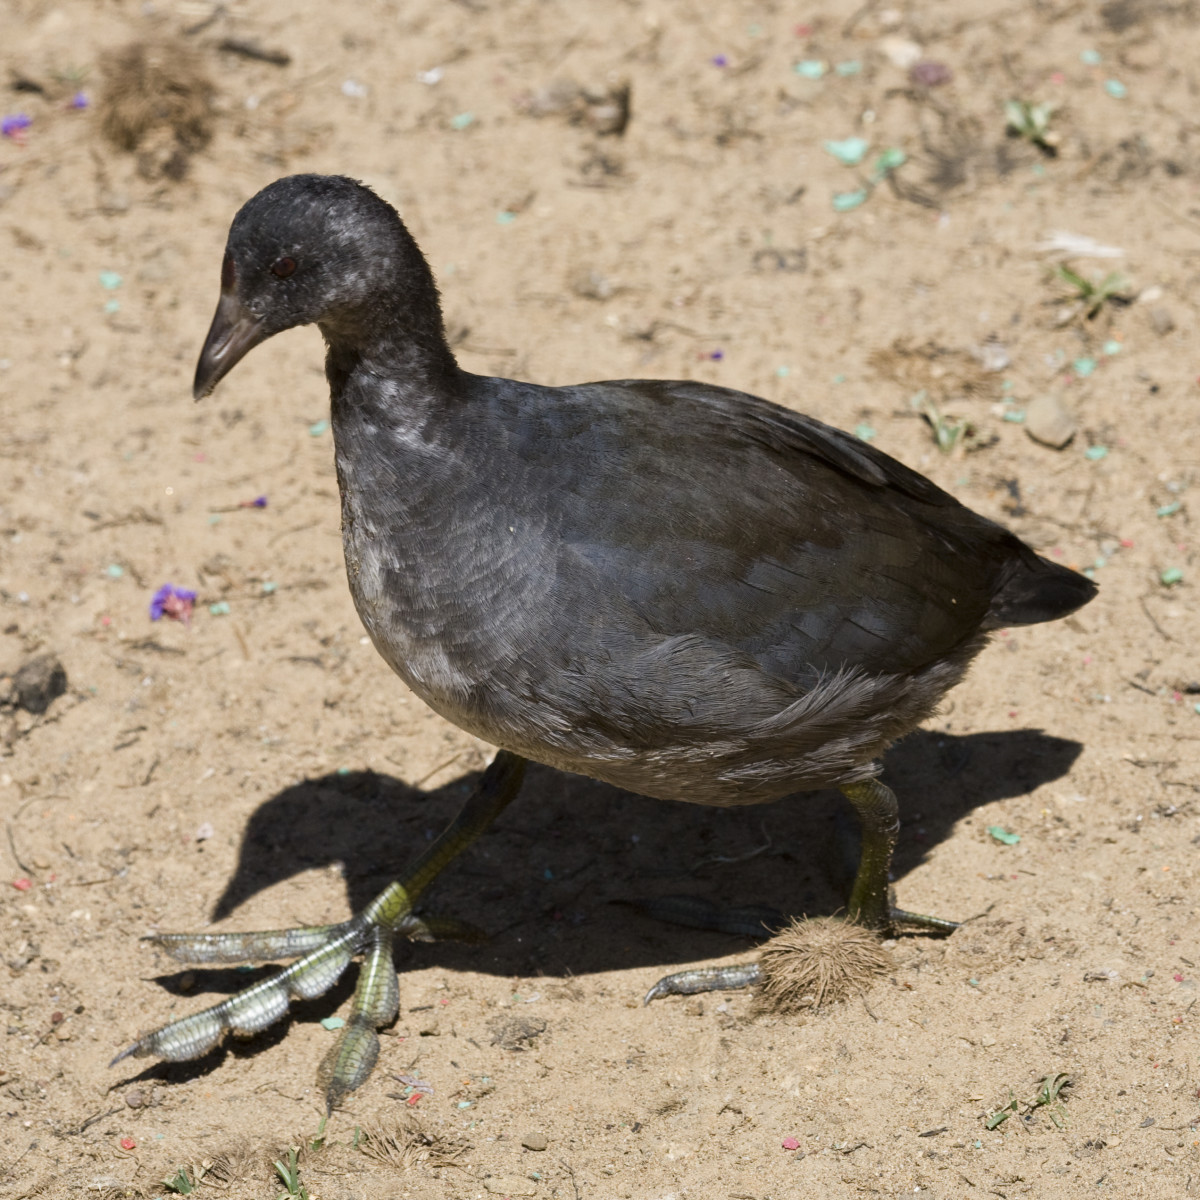 A juvenile American Coot. Just look at those feet!